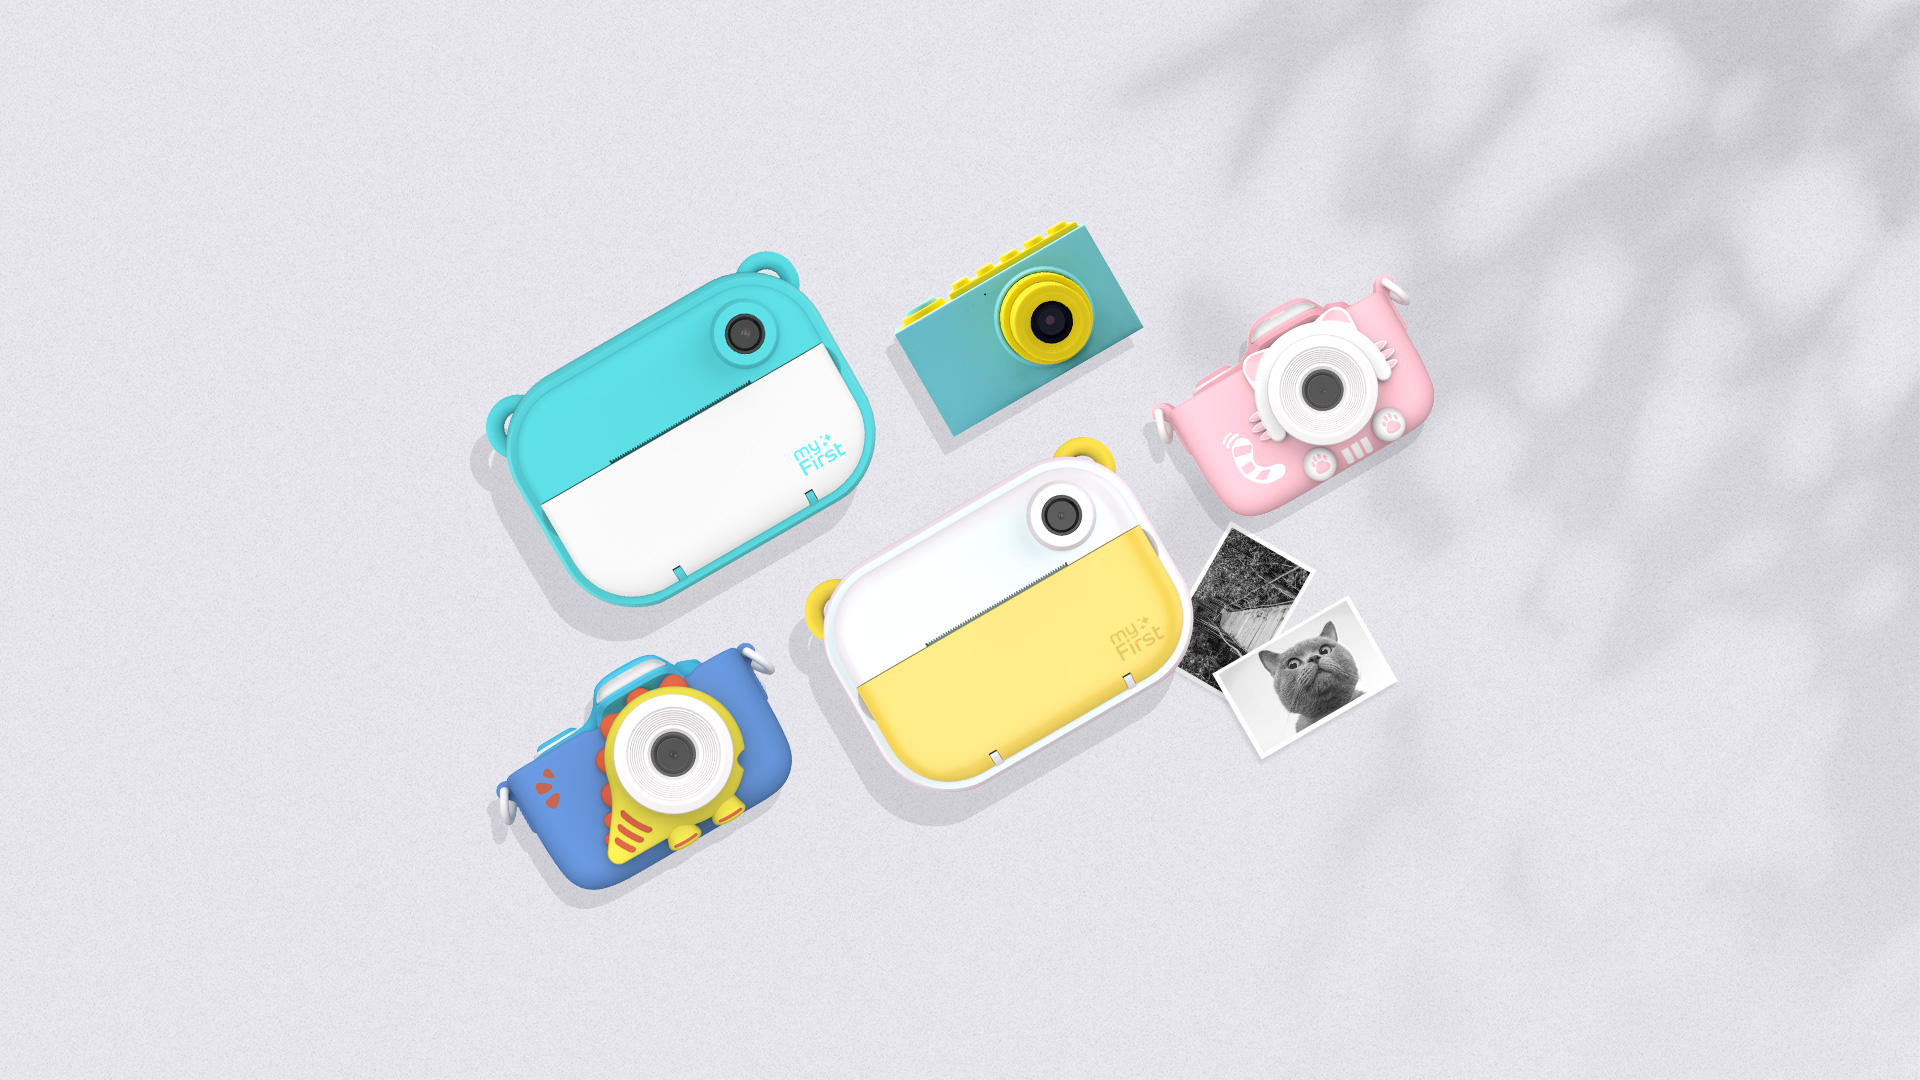 myFirst Camera Collection - Camera for Kids with waterproof casing